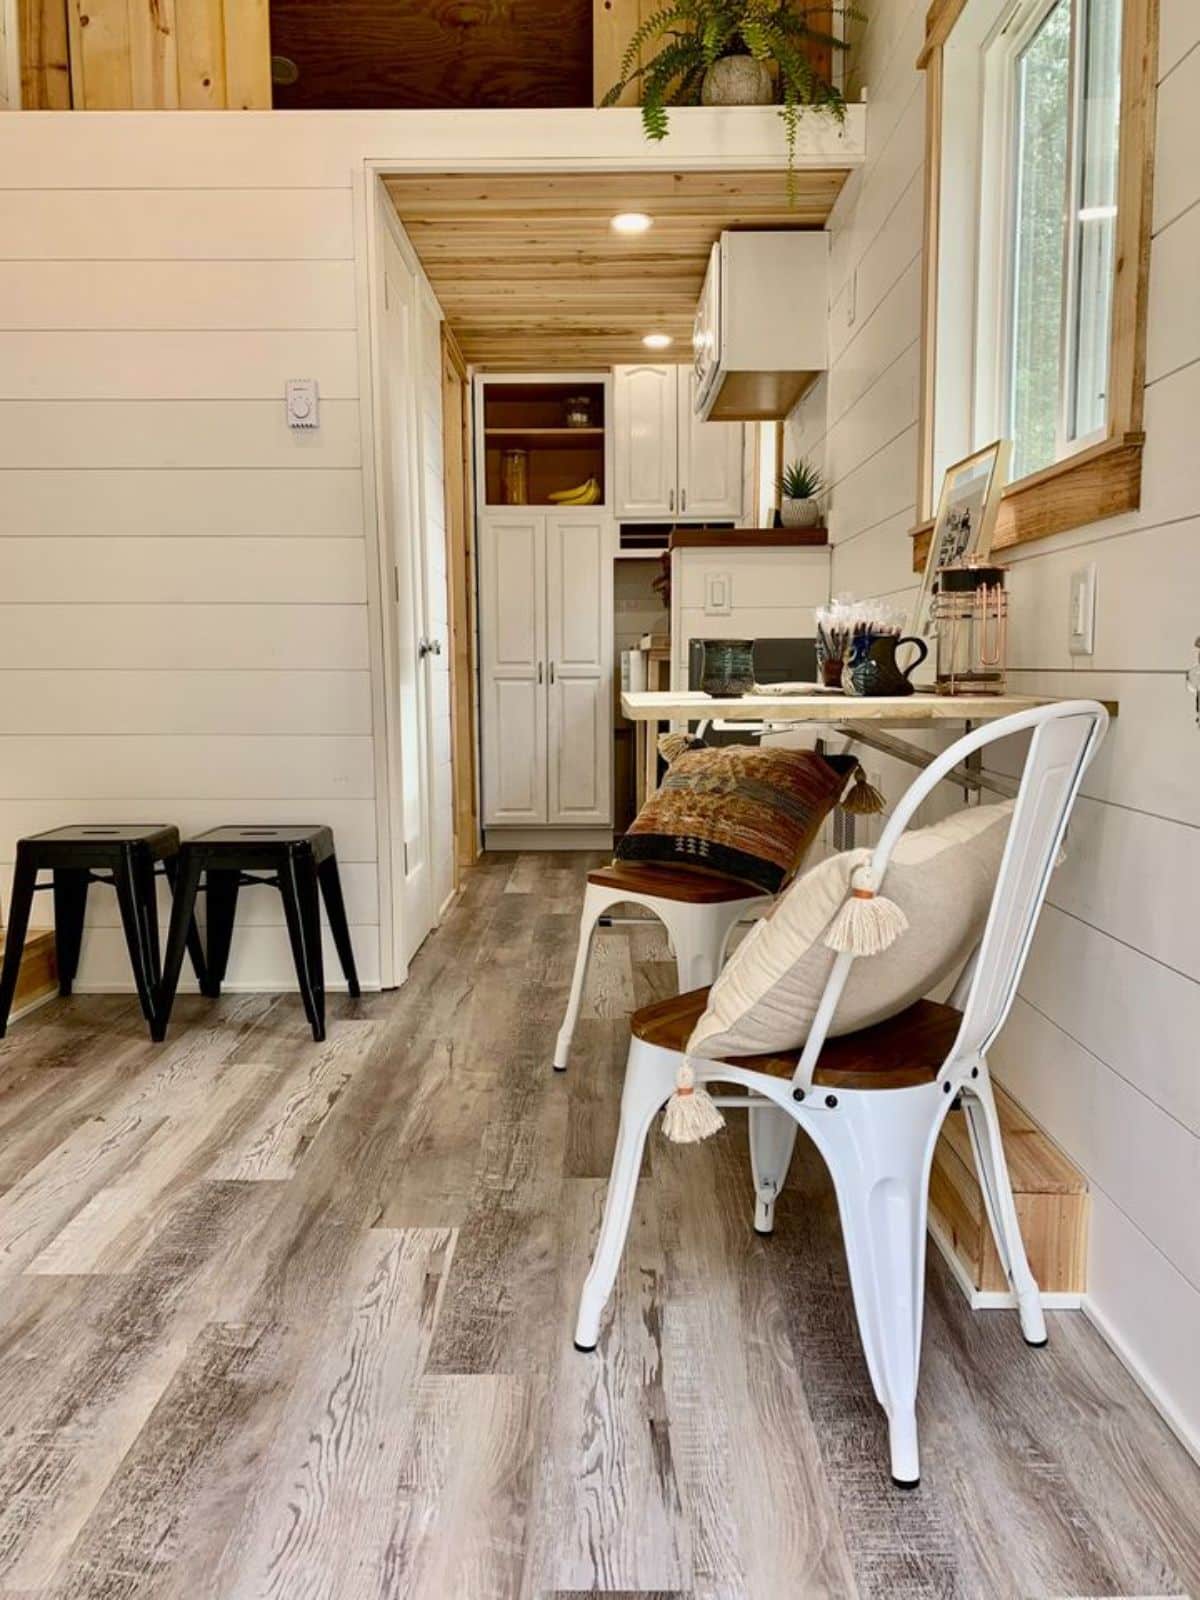 Wooden interiors of 20’ tiny home